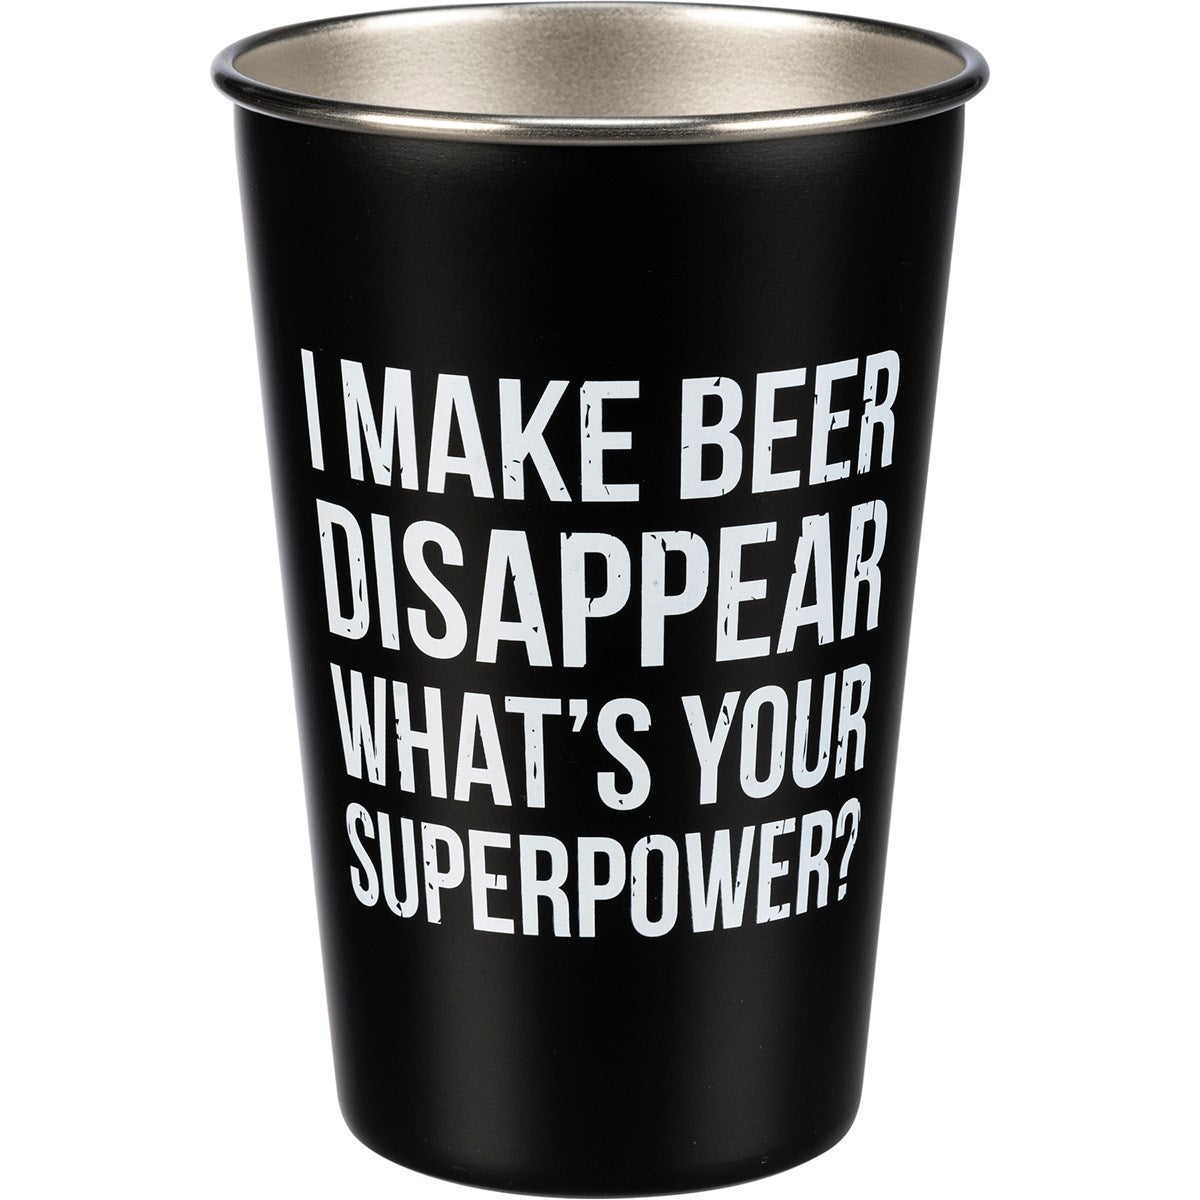 "WHAT'S YOUR SUPERPOWER?" BEER PINT GLASS